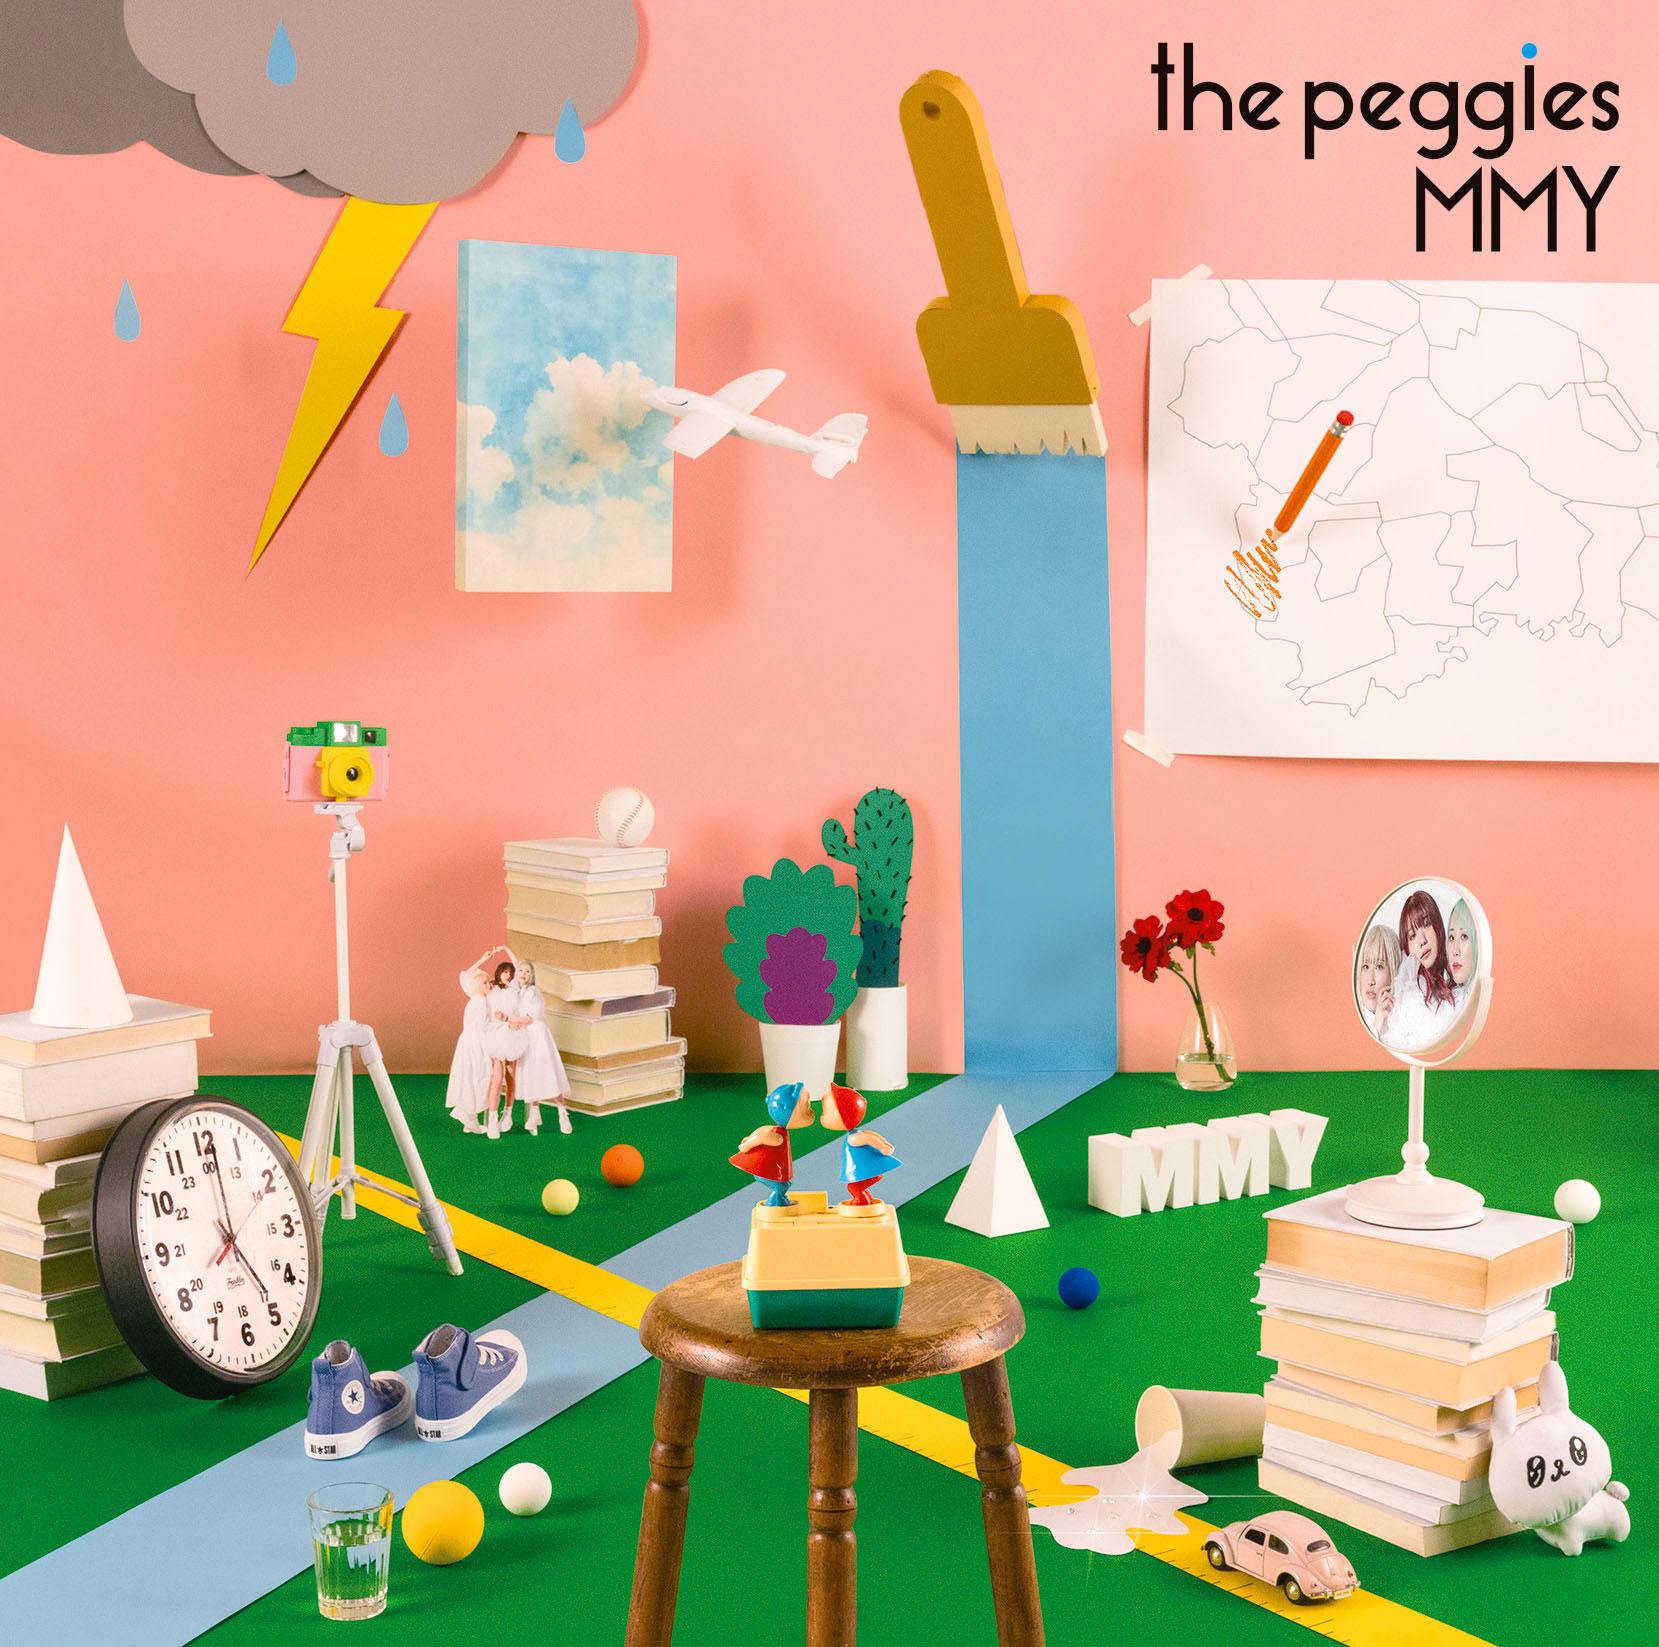 the peggies All Time Best AlbumMMY